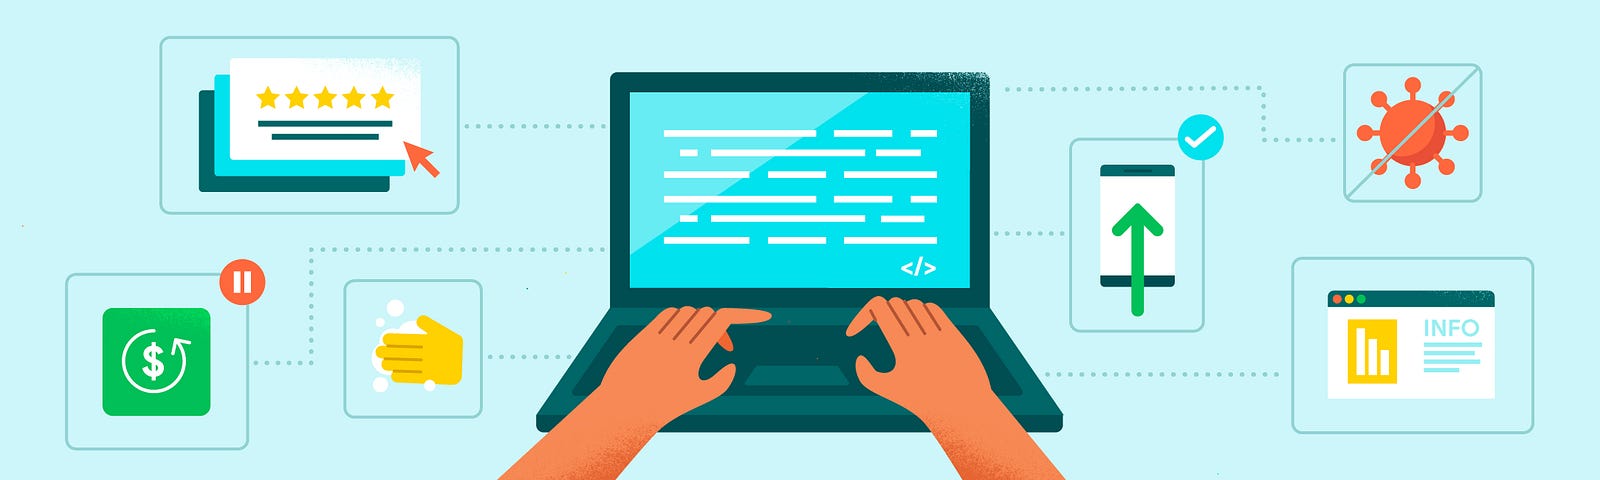 Illustration of a person’s hands typing on a laptop with tech symbols surrounding it.